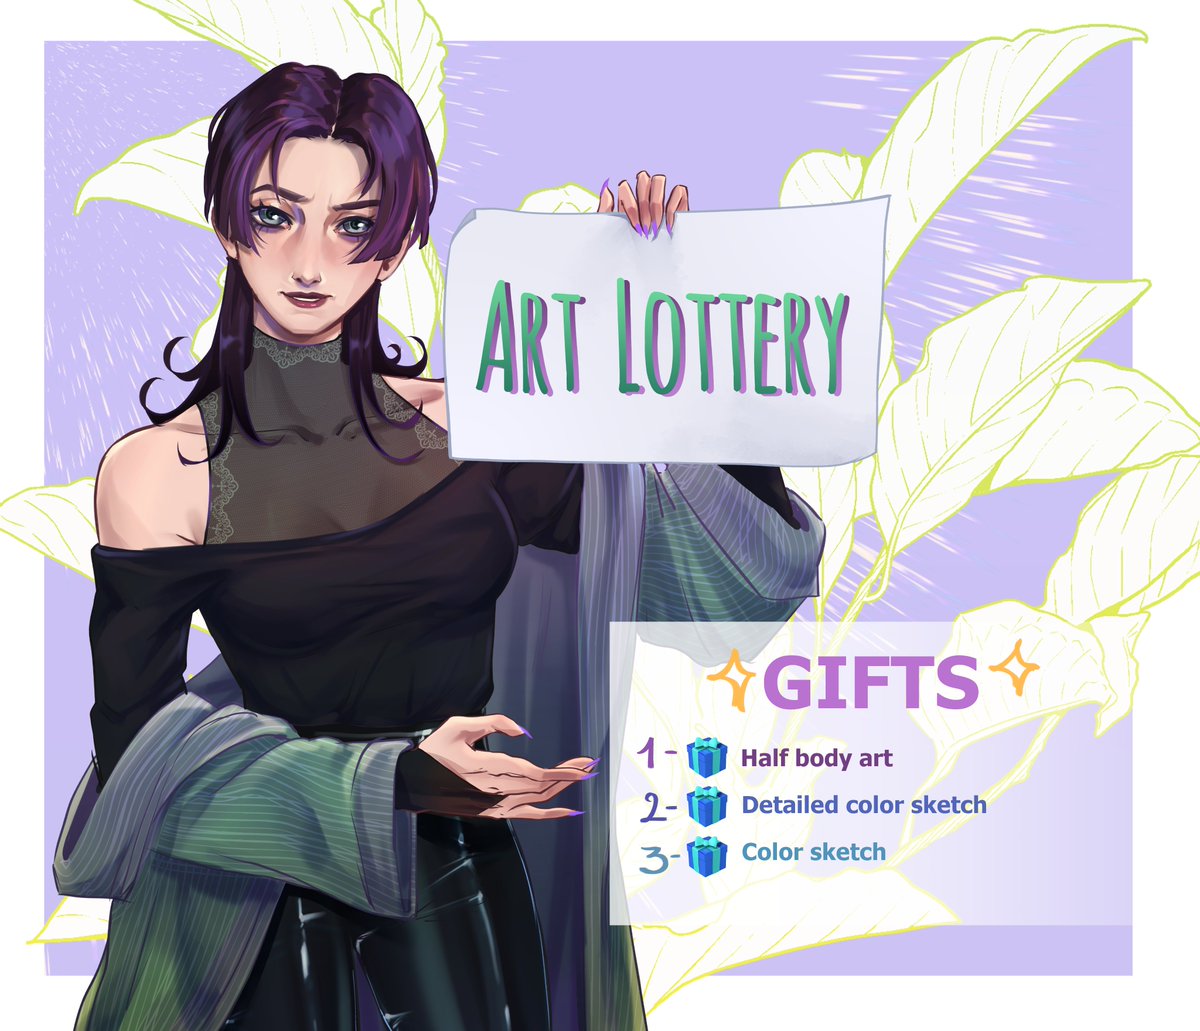 #ArtLottery #украрт Results 21.07.23 !
✨GIFTS✨
1 - Half body art
2 - Detailed color sketch
3 - Color sketch

Rules:  
- Retweet and like this post
- Be subscribed to my account

may luck be with you👀✨